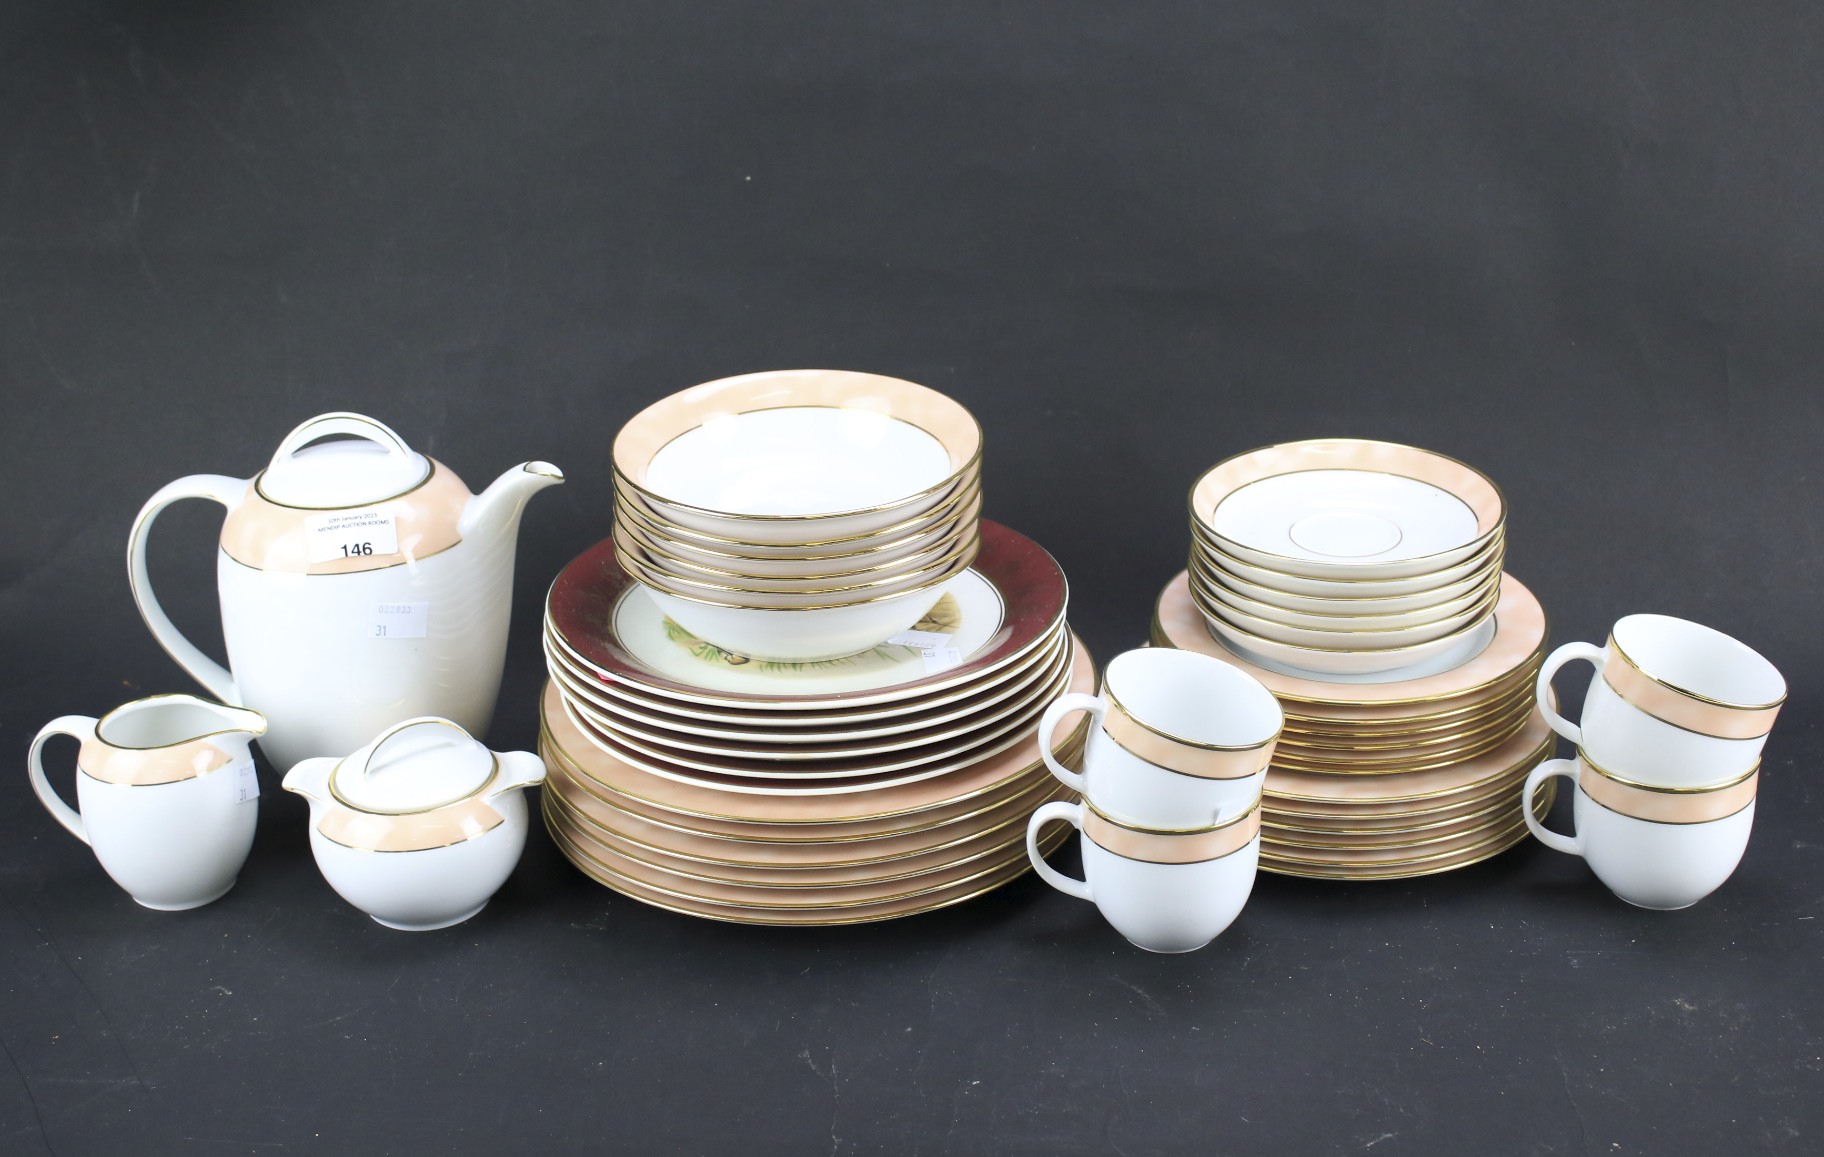 A selection of ceramic dinner wares.